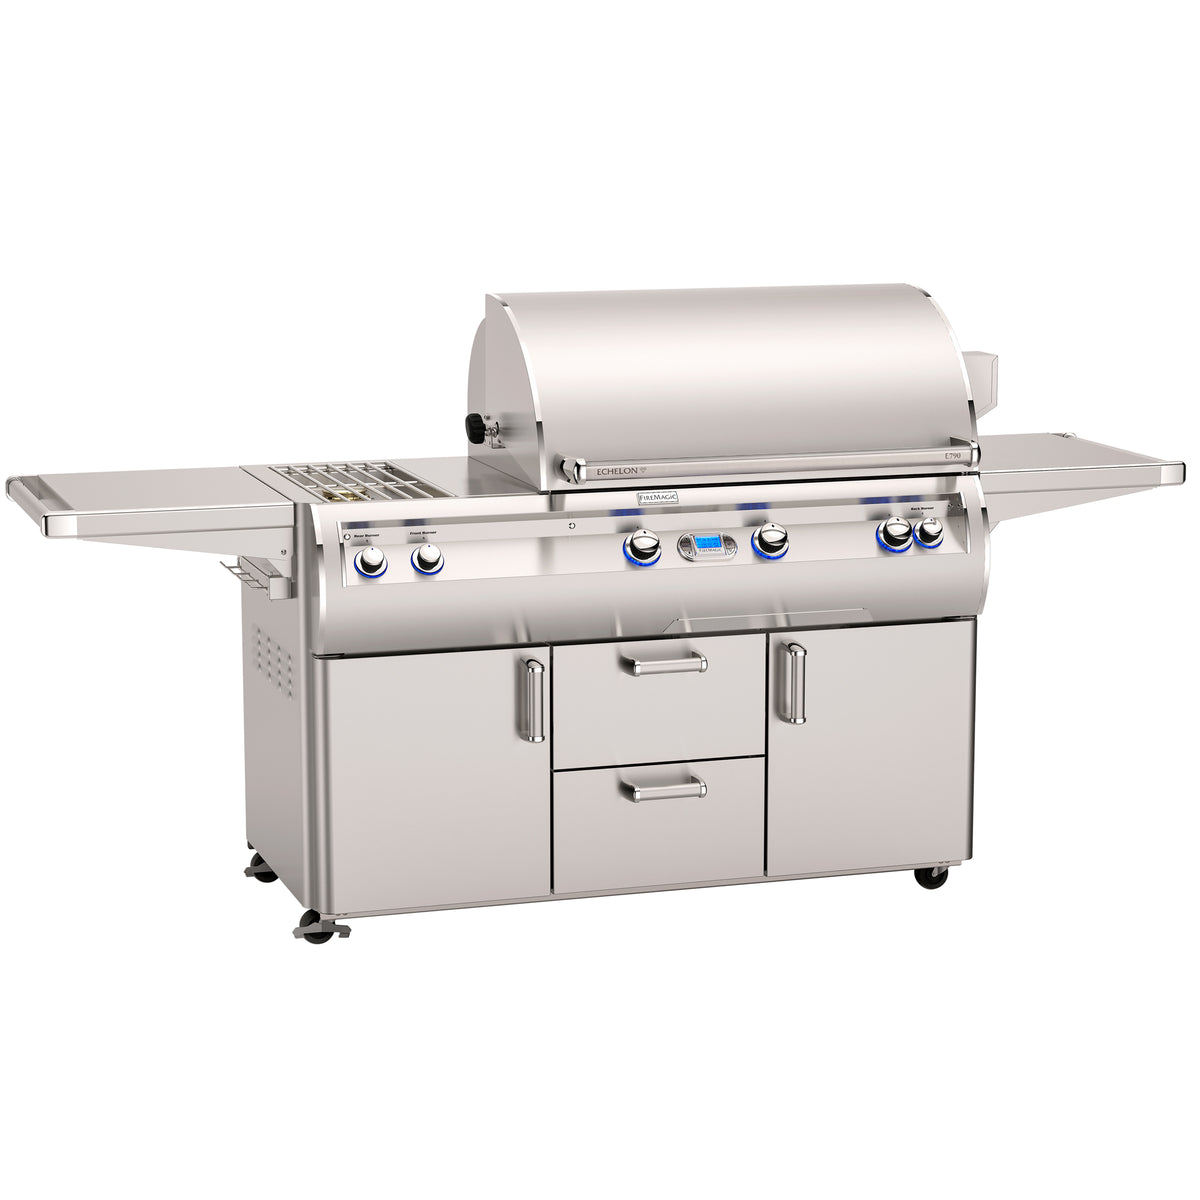 Fire Magic Echelon E790s Portable Grills with Analog Thermometer &amp; Double Side Burner